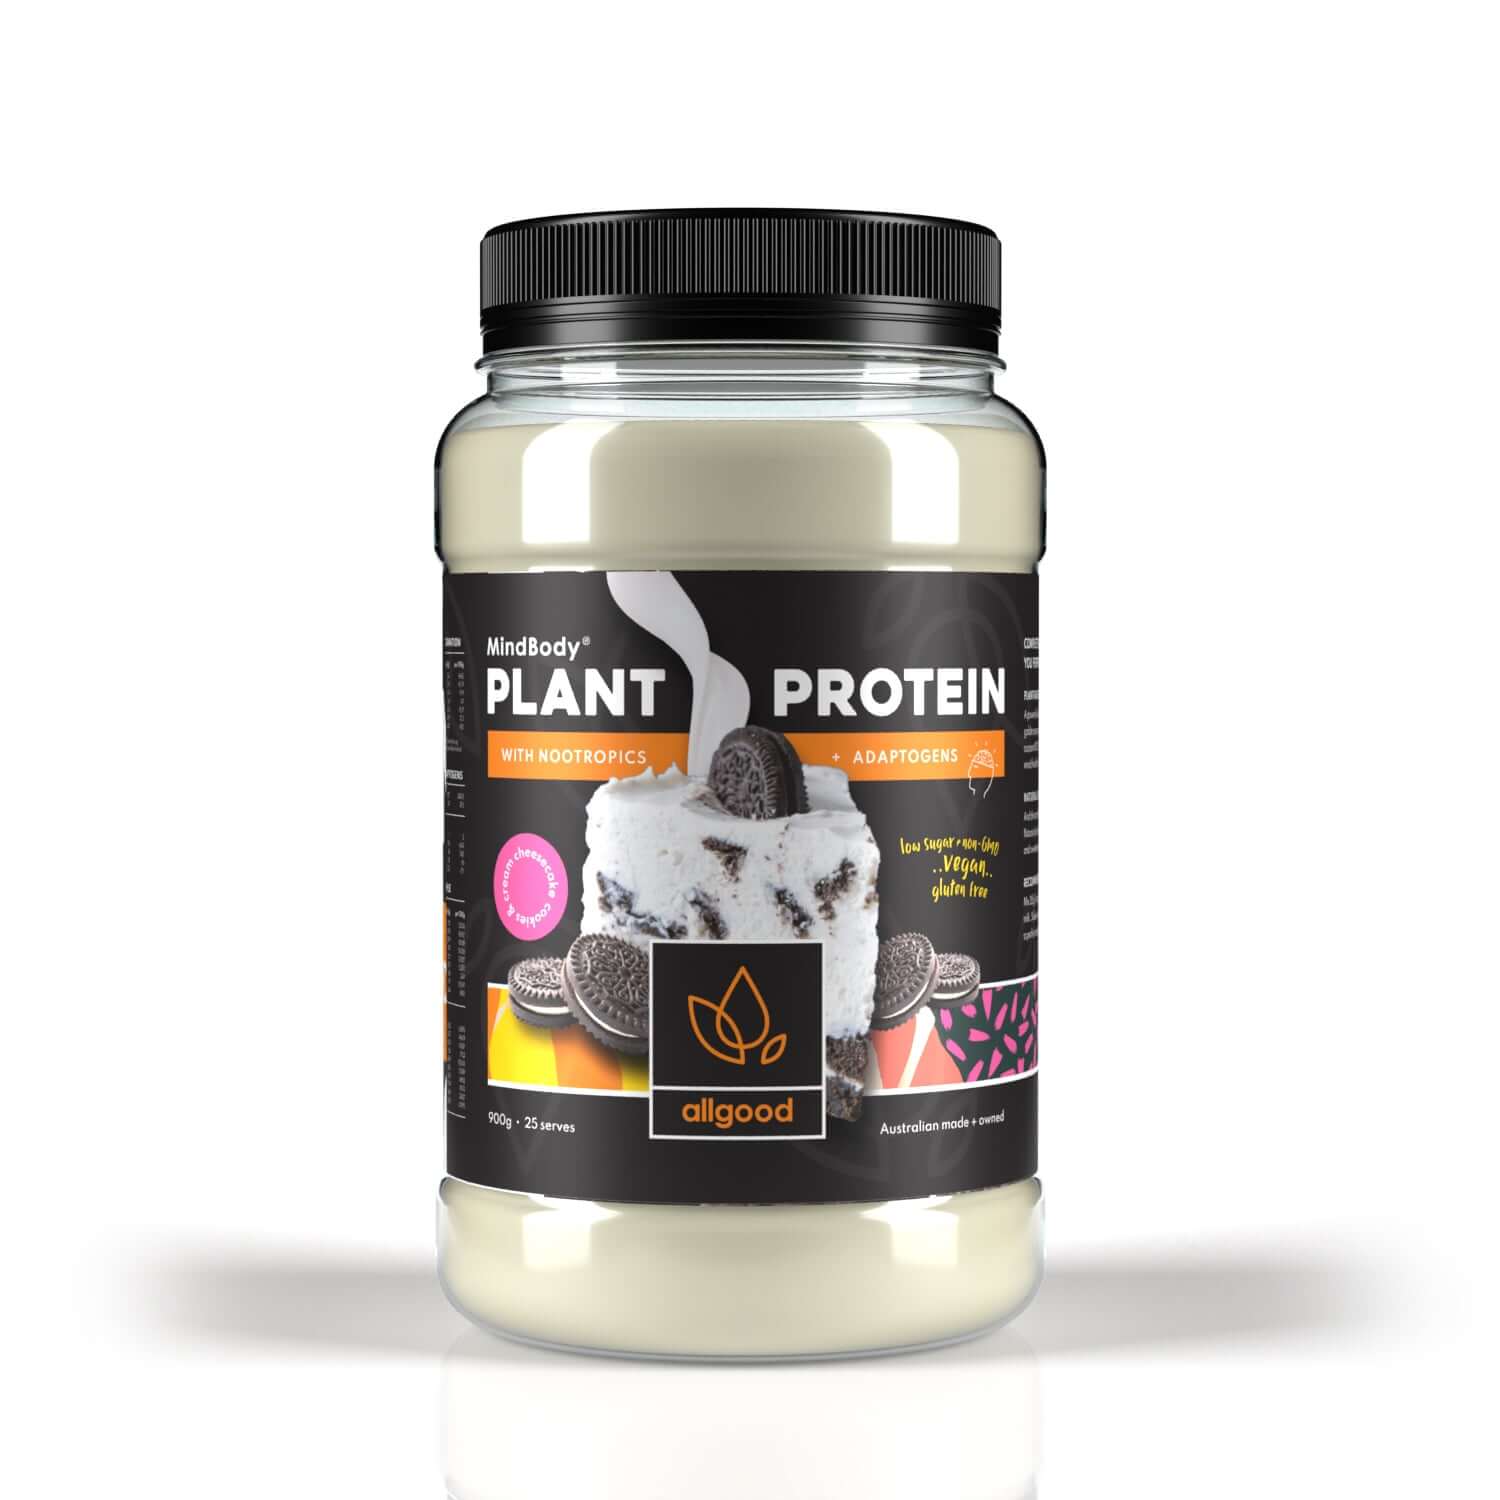 Allgood Nutrition Australia Allgood Nutrition - Plant Protein with Nootropics & Adaptogens (Cookies & Cream Cheesecake)